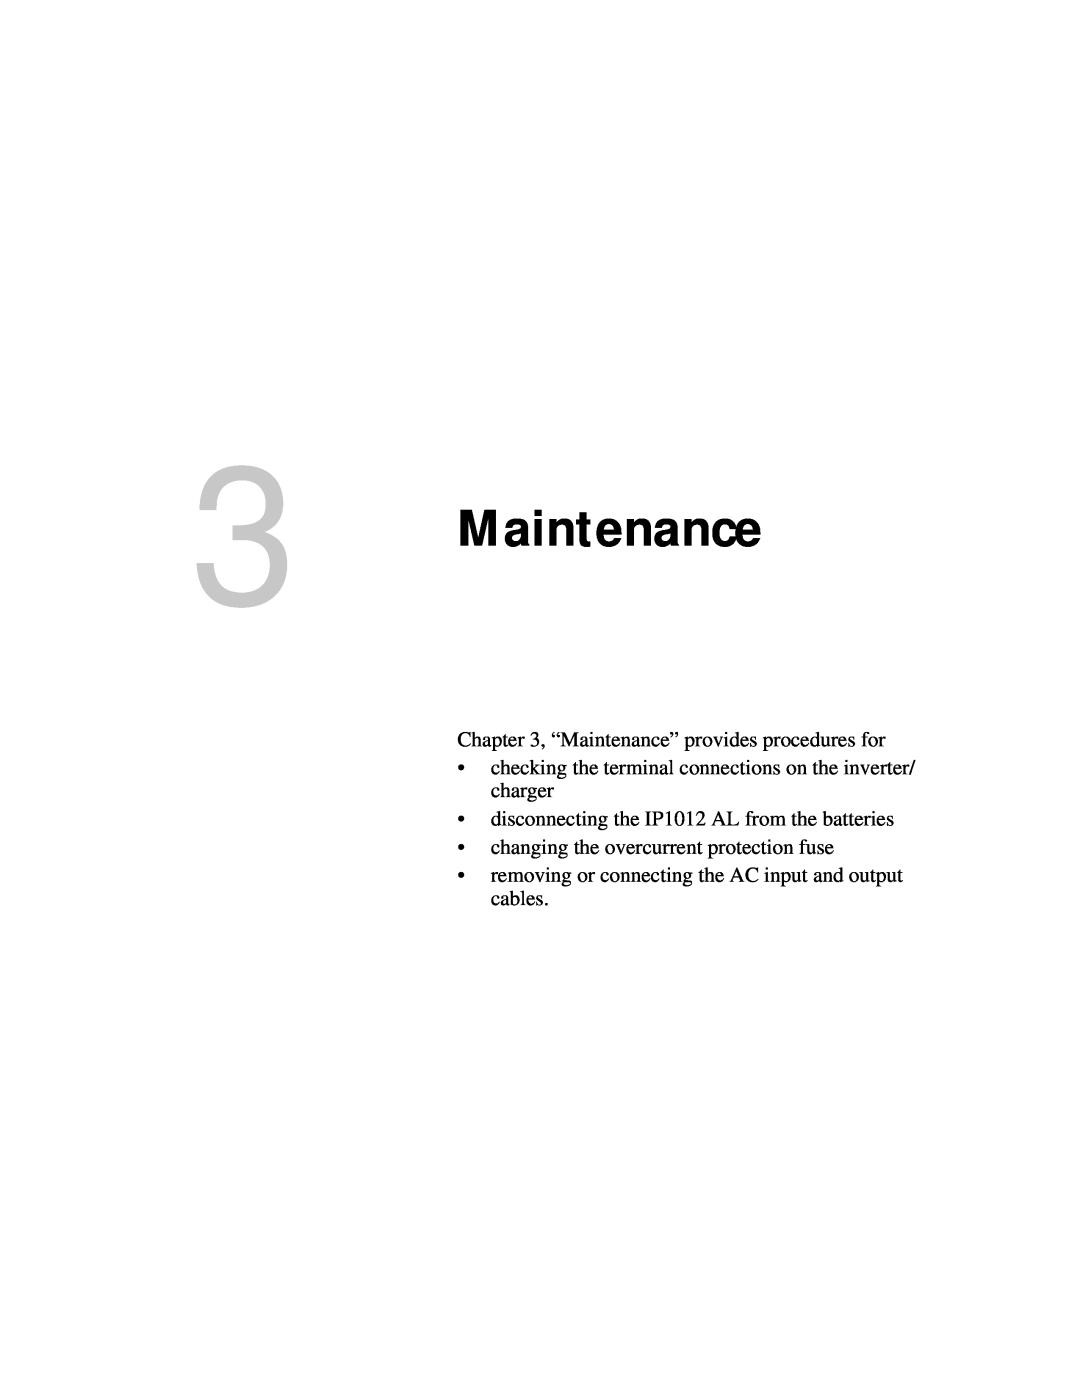 Xantrex Technology manual “Maintenance” provides procedures for, disconnecting the IP1012 AL from the batteries 